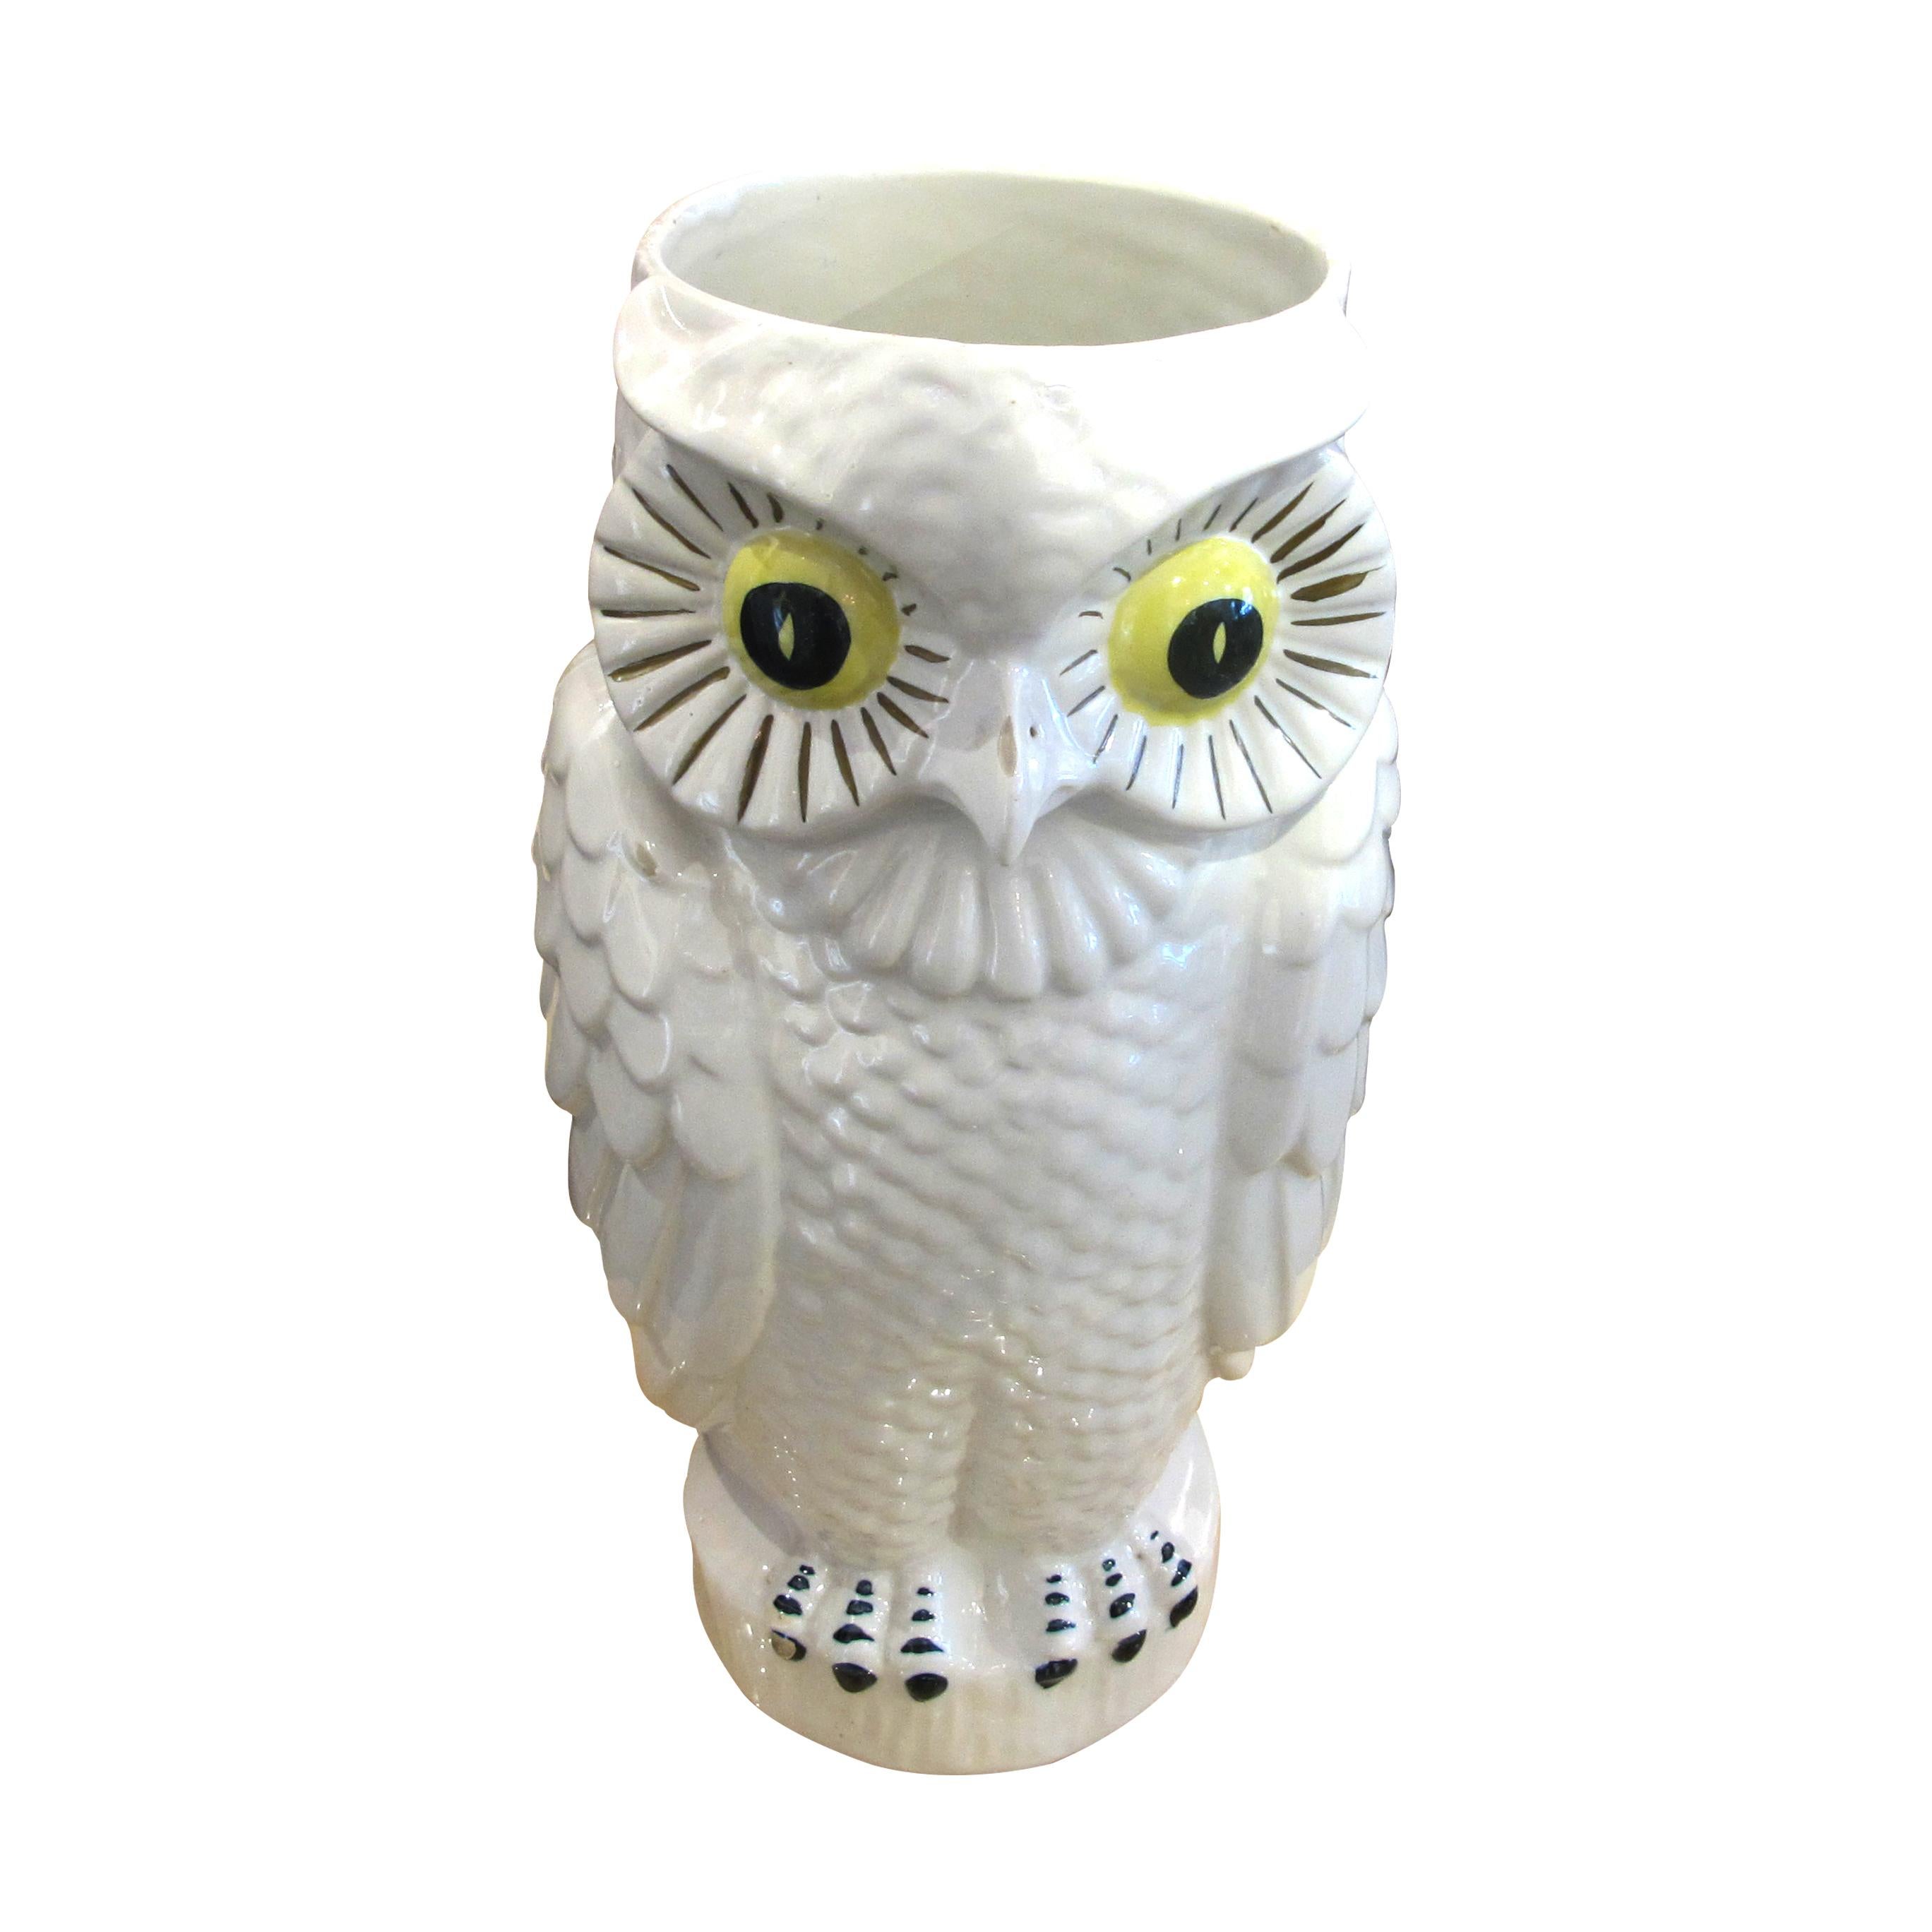 A highly decorative, mid century, white glazed ceramic flower vase or planter. This large vase which is in the shape of an owl is a very unusual receptacle that can be used to hold flowers, plants or as an umbrella stand. It boasts beautiful